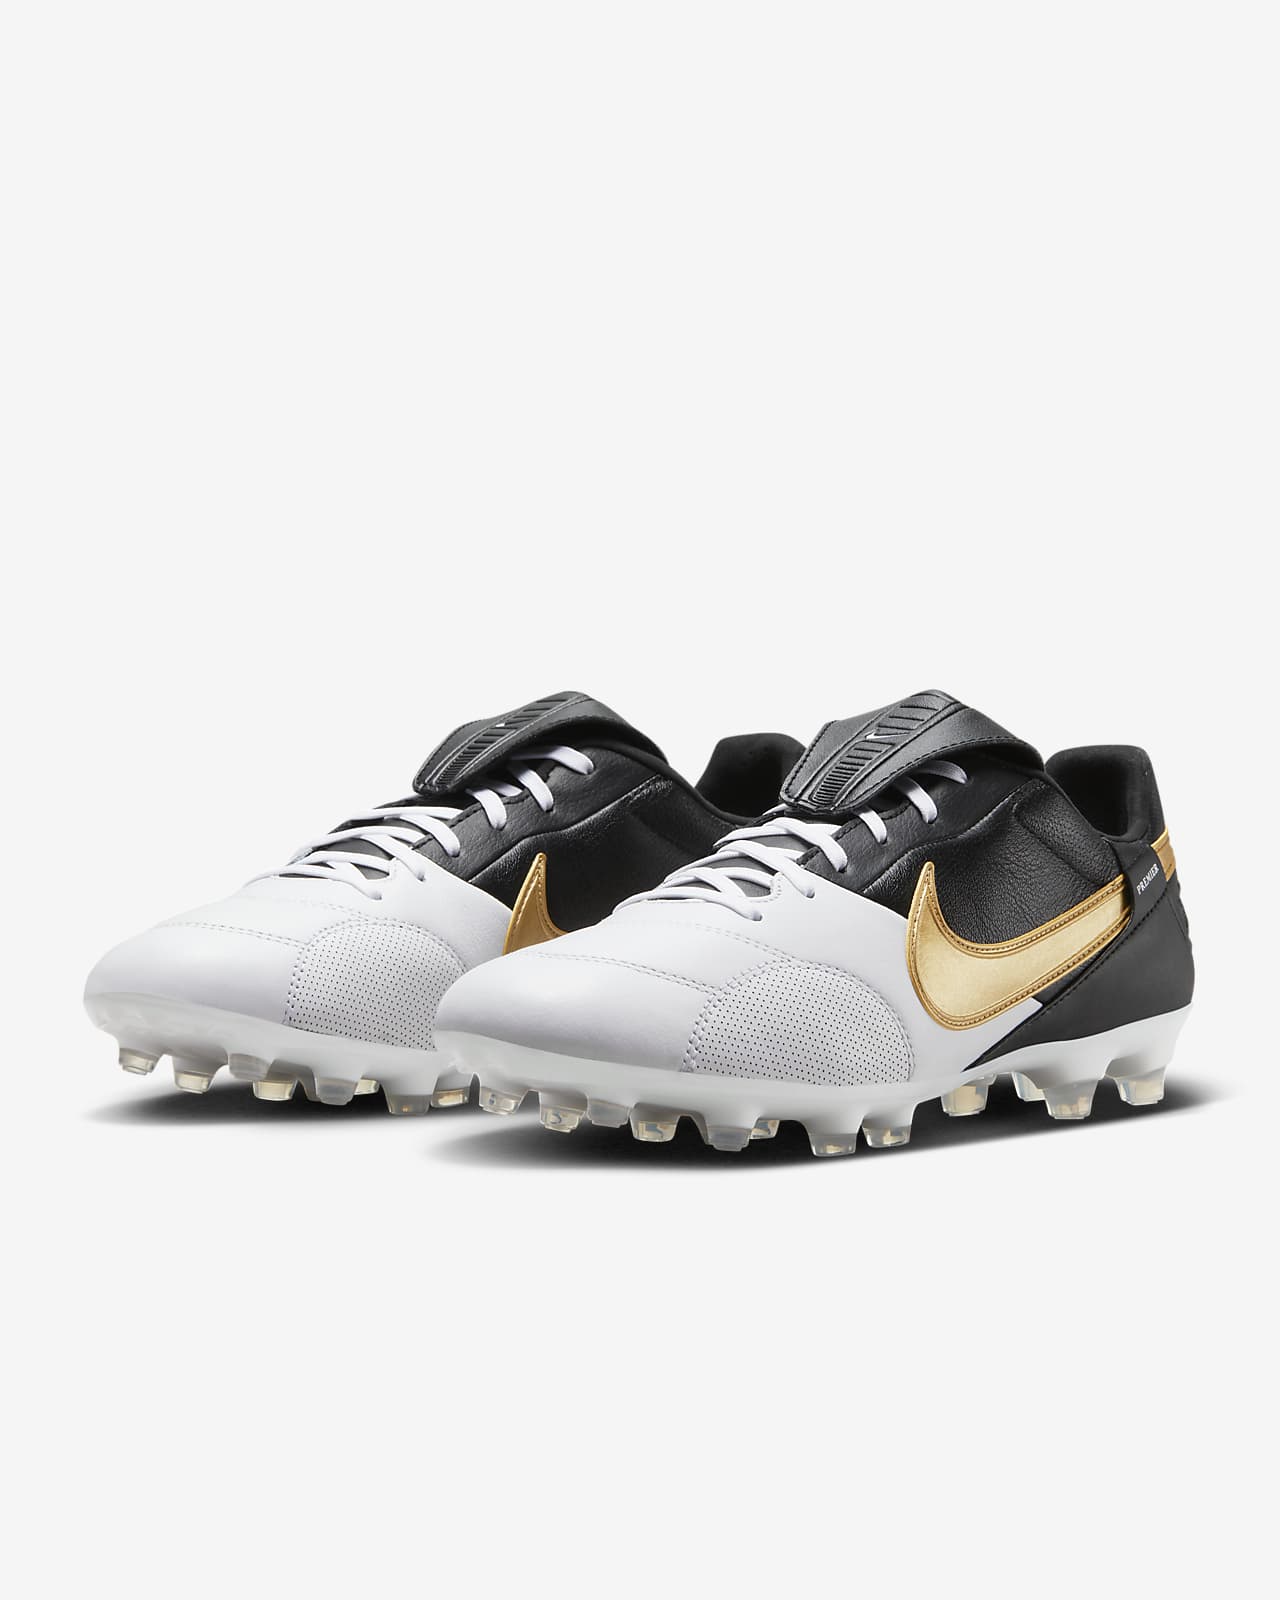 paus staal Piket The Nike Premier 3 FG Firm-Ground Soccer Cleats. Nike JP